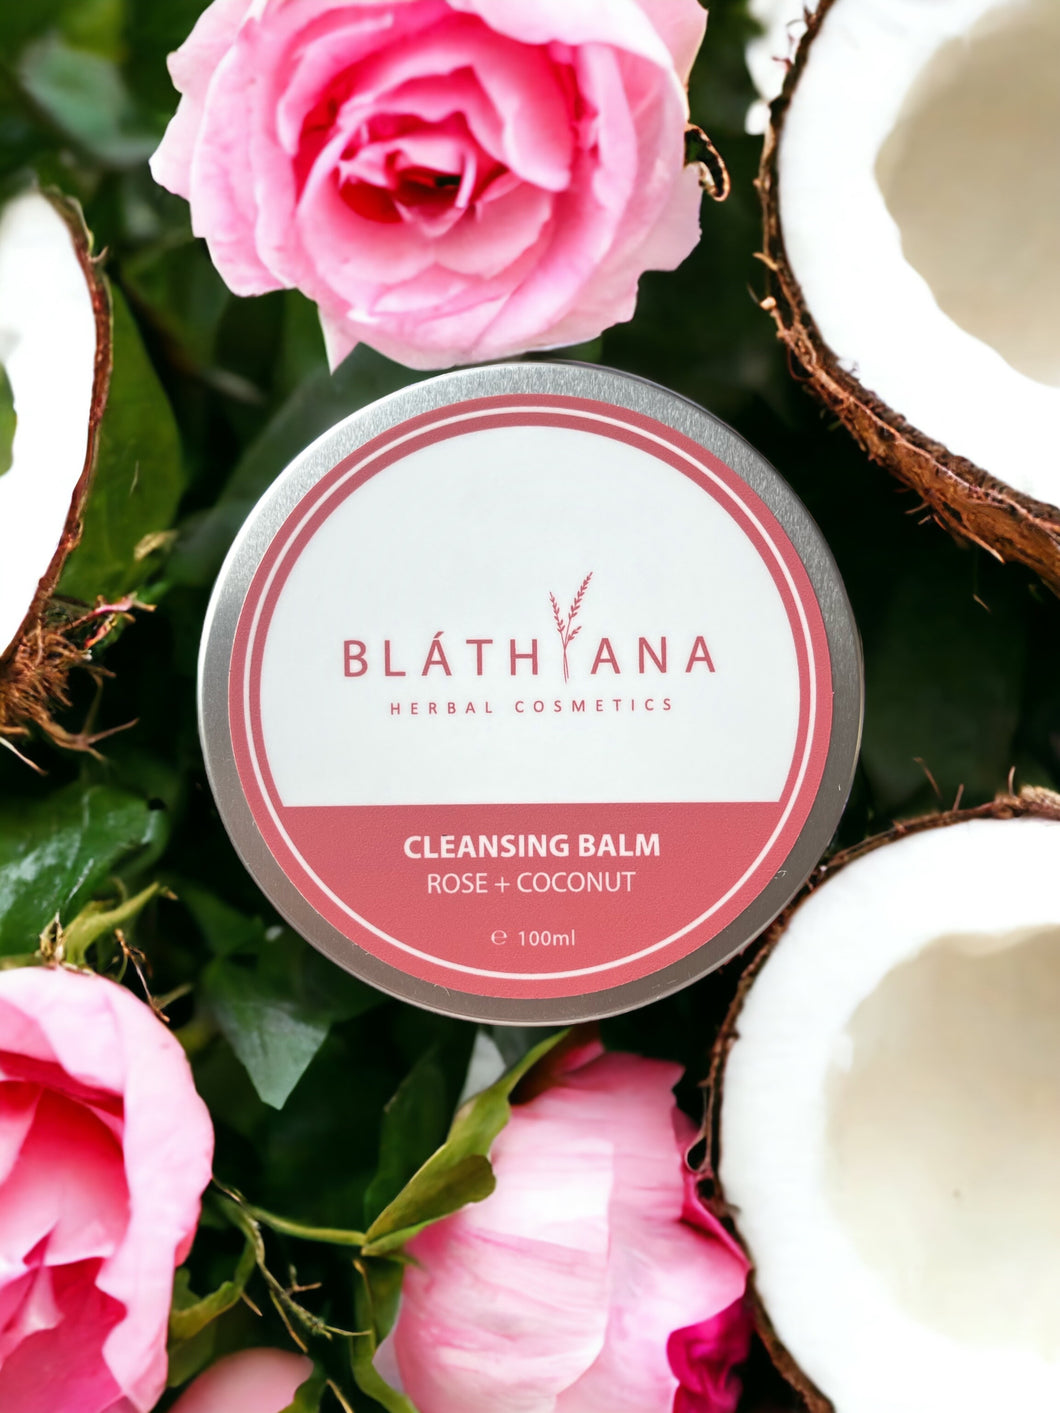 ROSE + COCONUT CLEANSING BALM